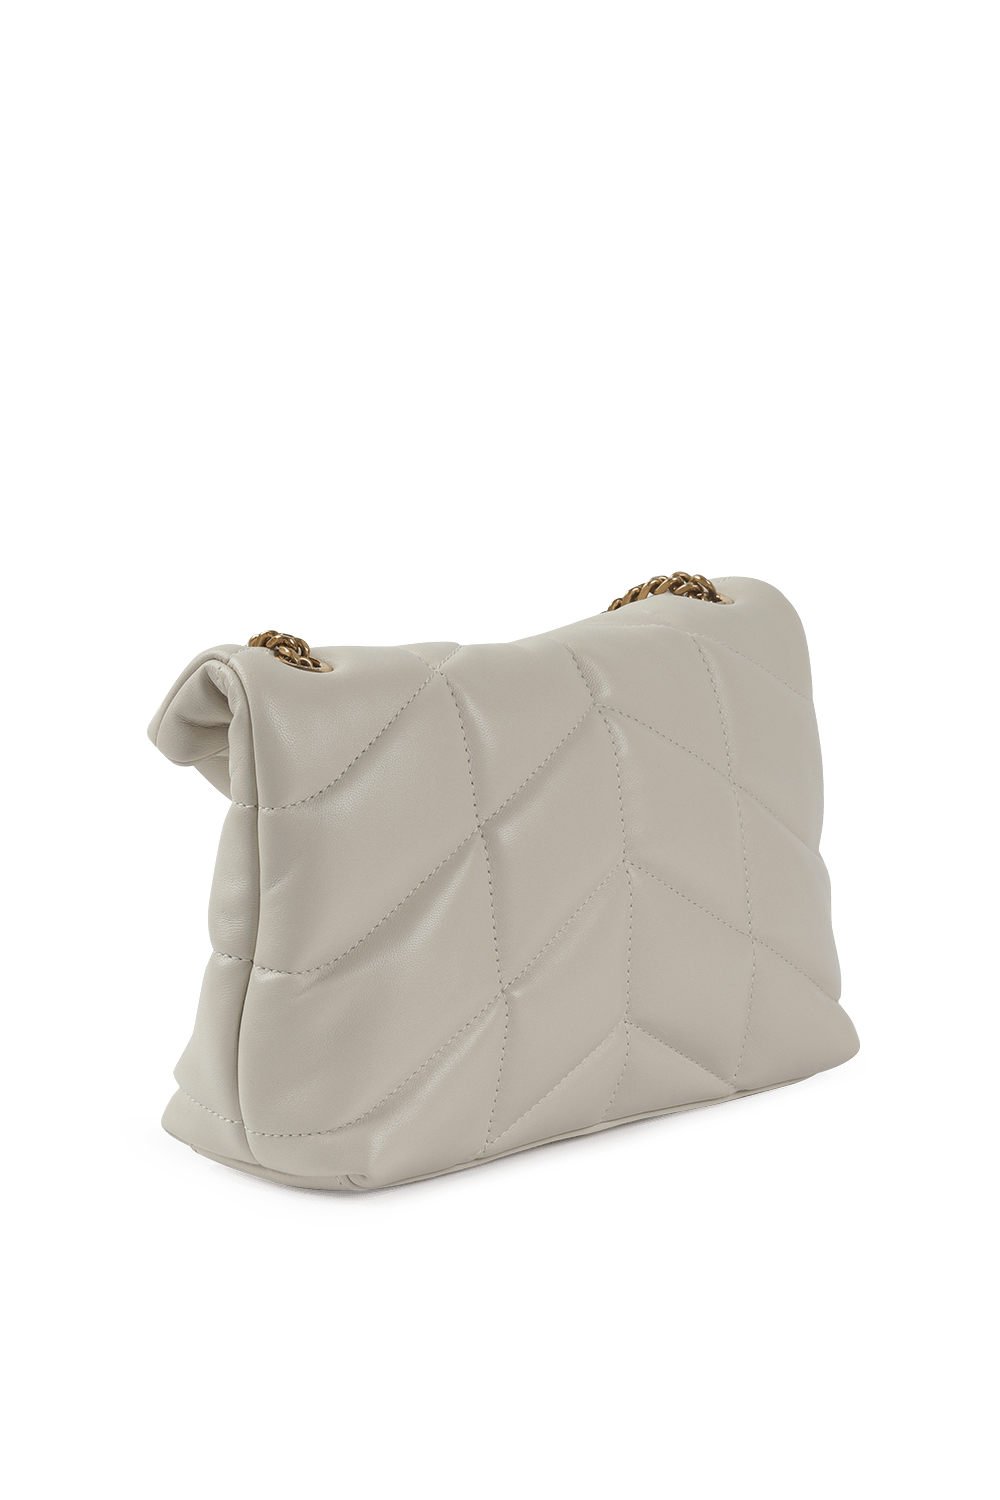 Puffer Toy Bag In Quilted White Leather SAINT LAURENT